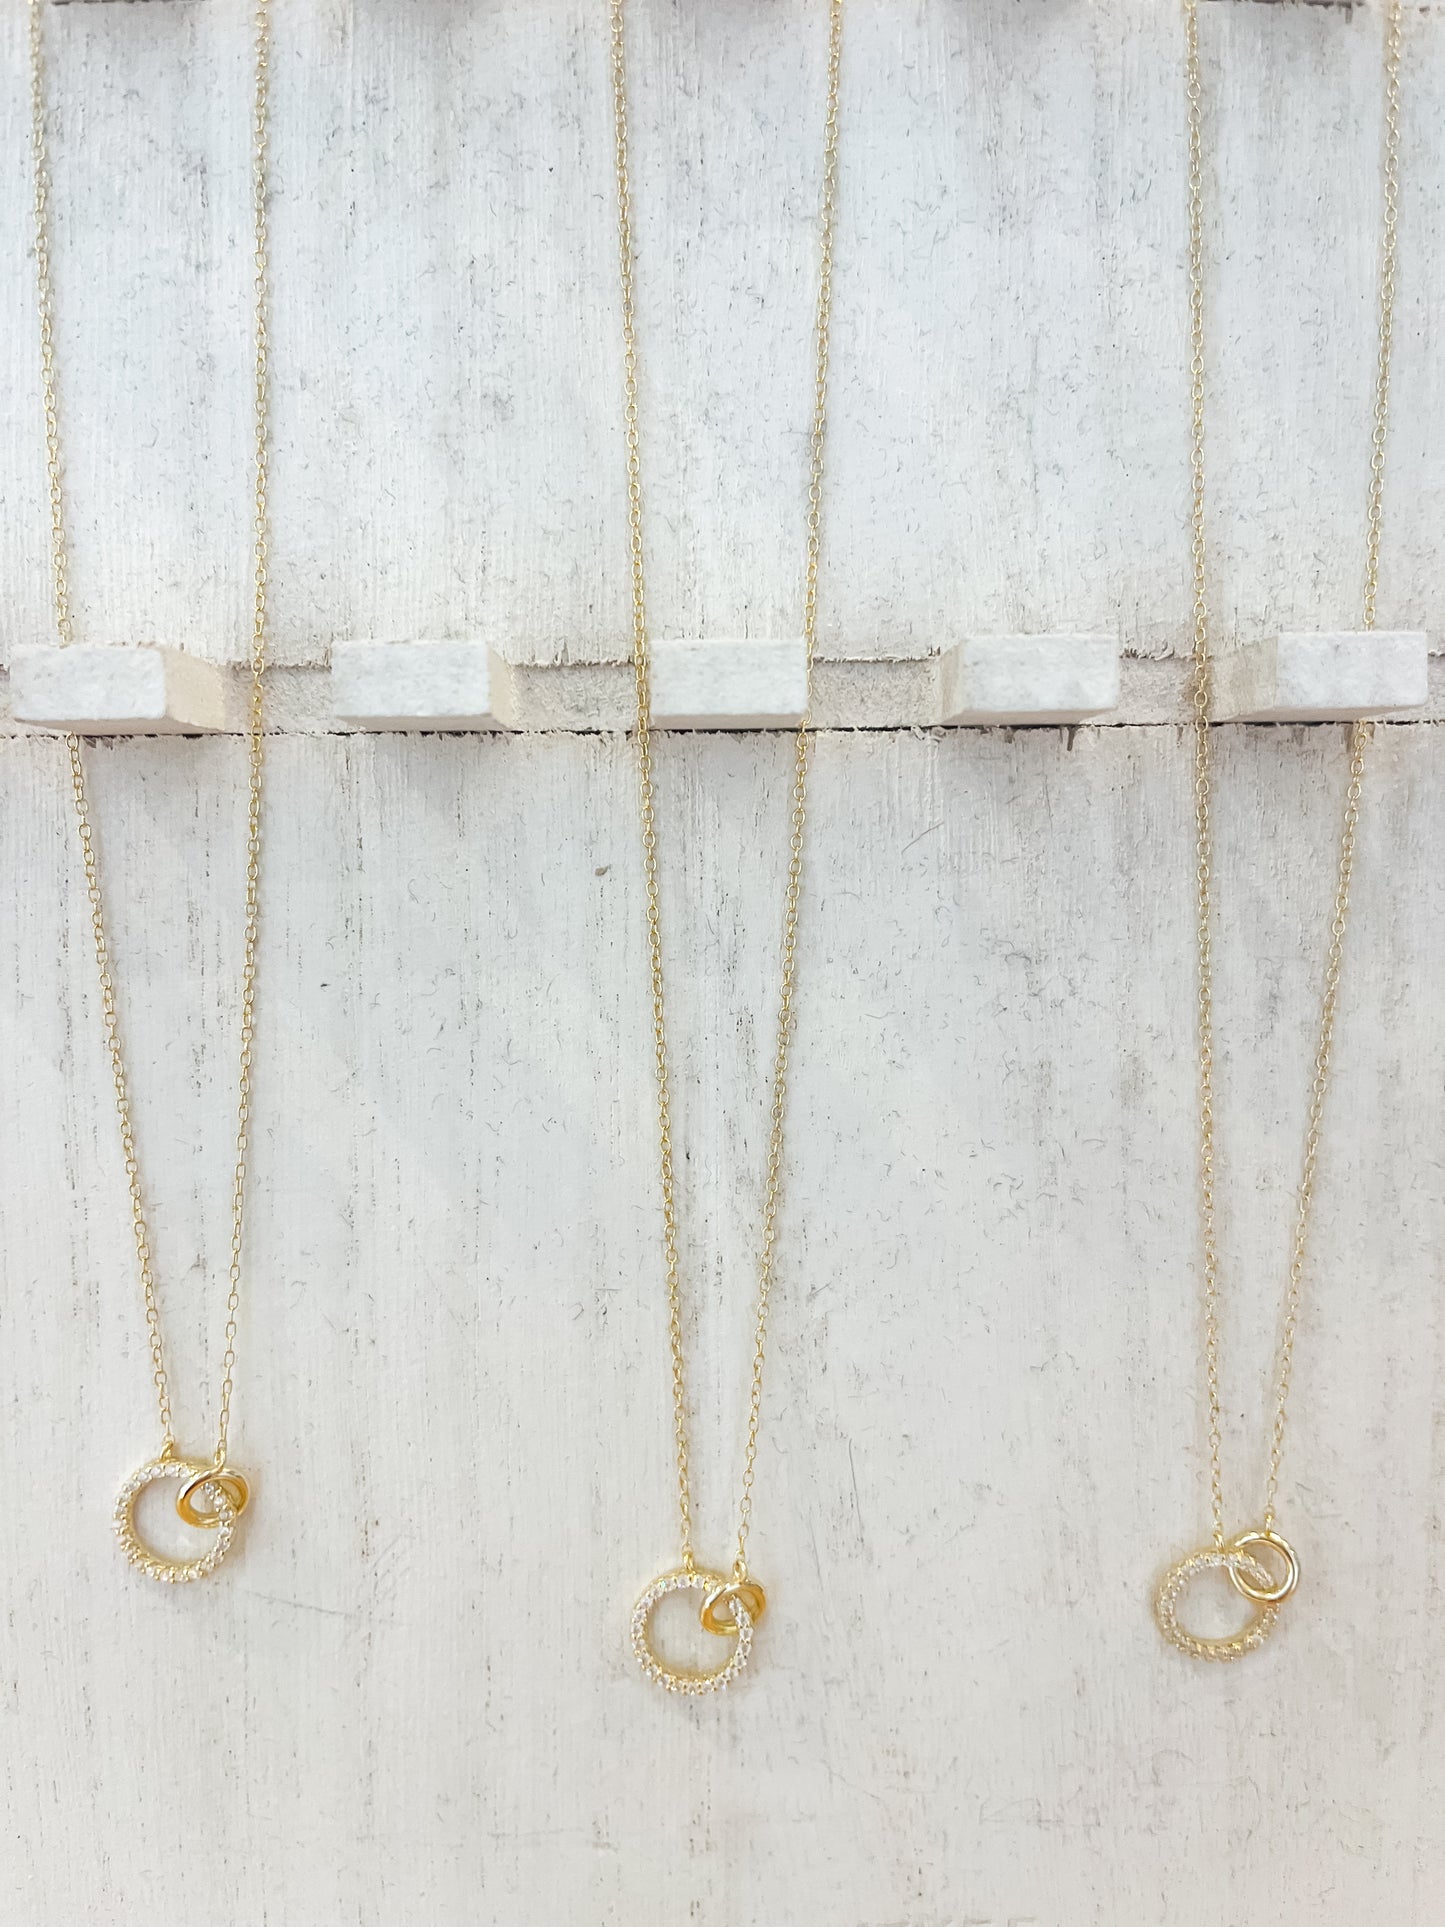 Sissy Necklace - 14k Gold Plated